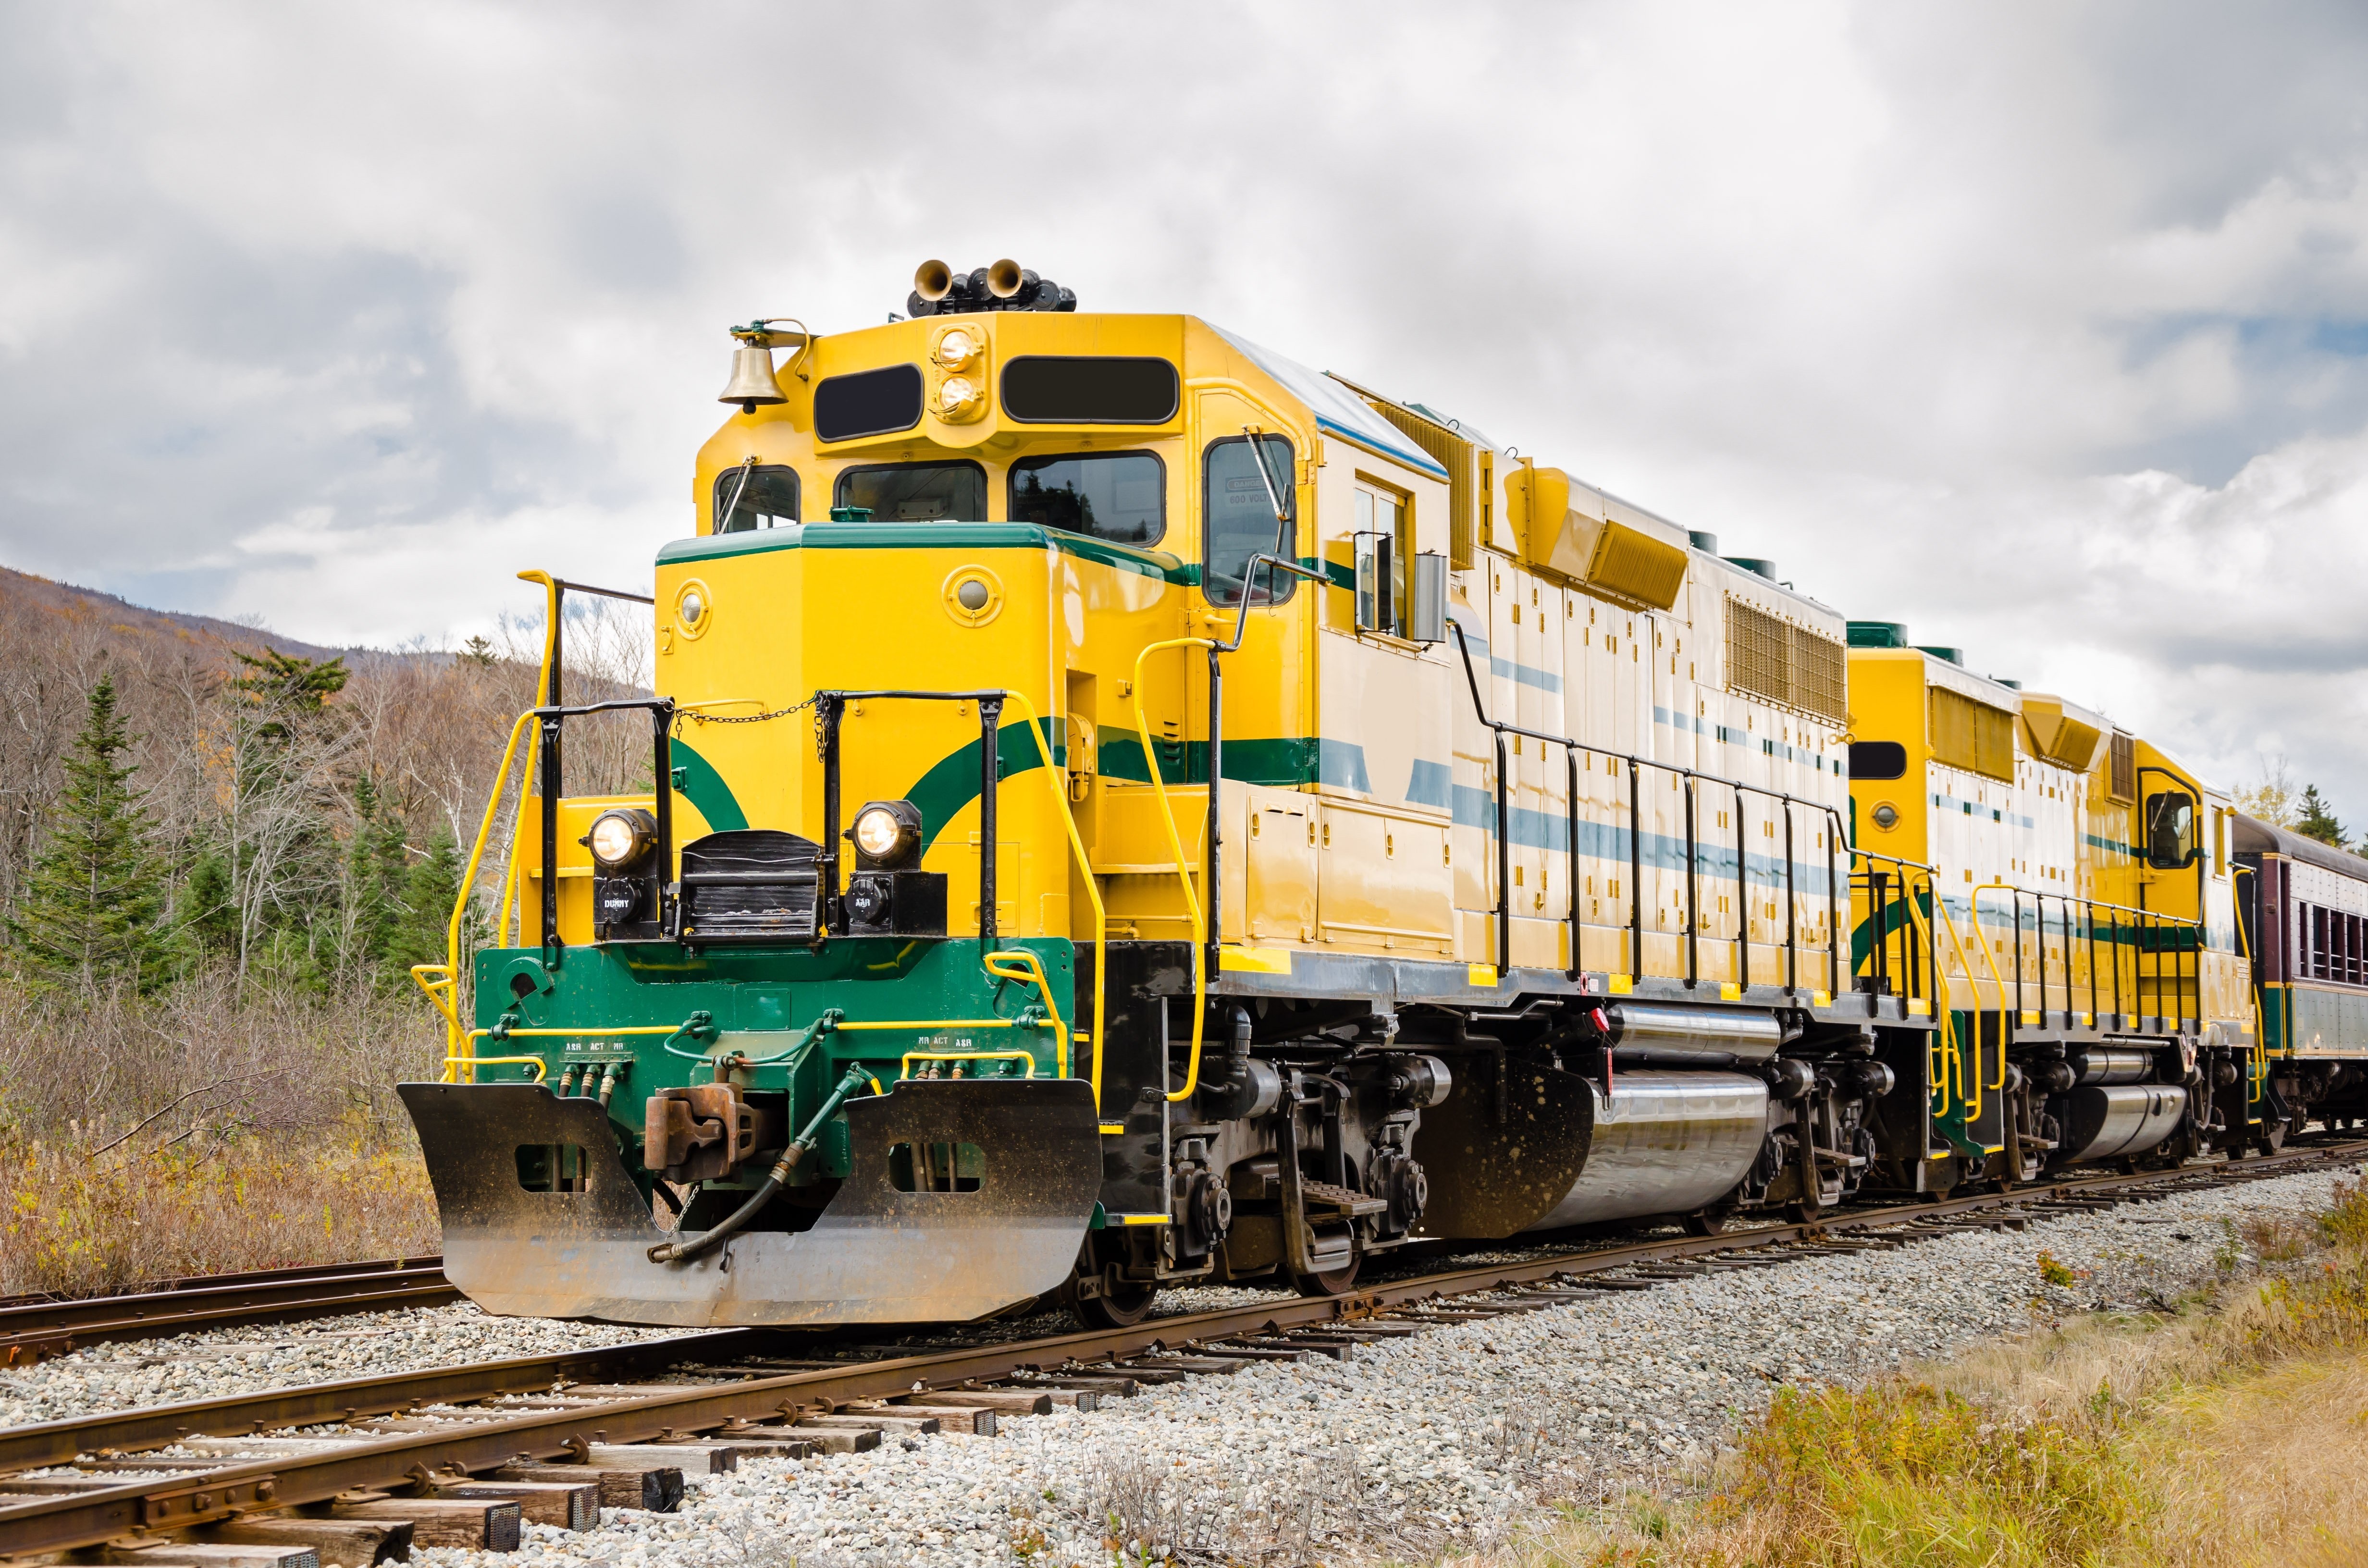 Rail locomotives provide a vital transportation service for both passengers and freight across the world. (Image Source: AdobeStock 4937201)